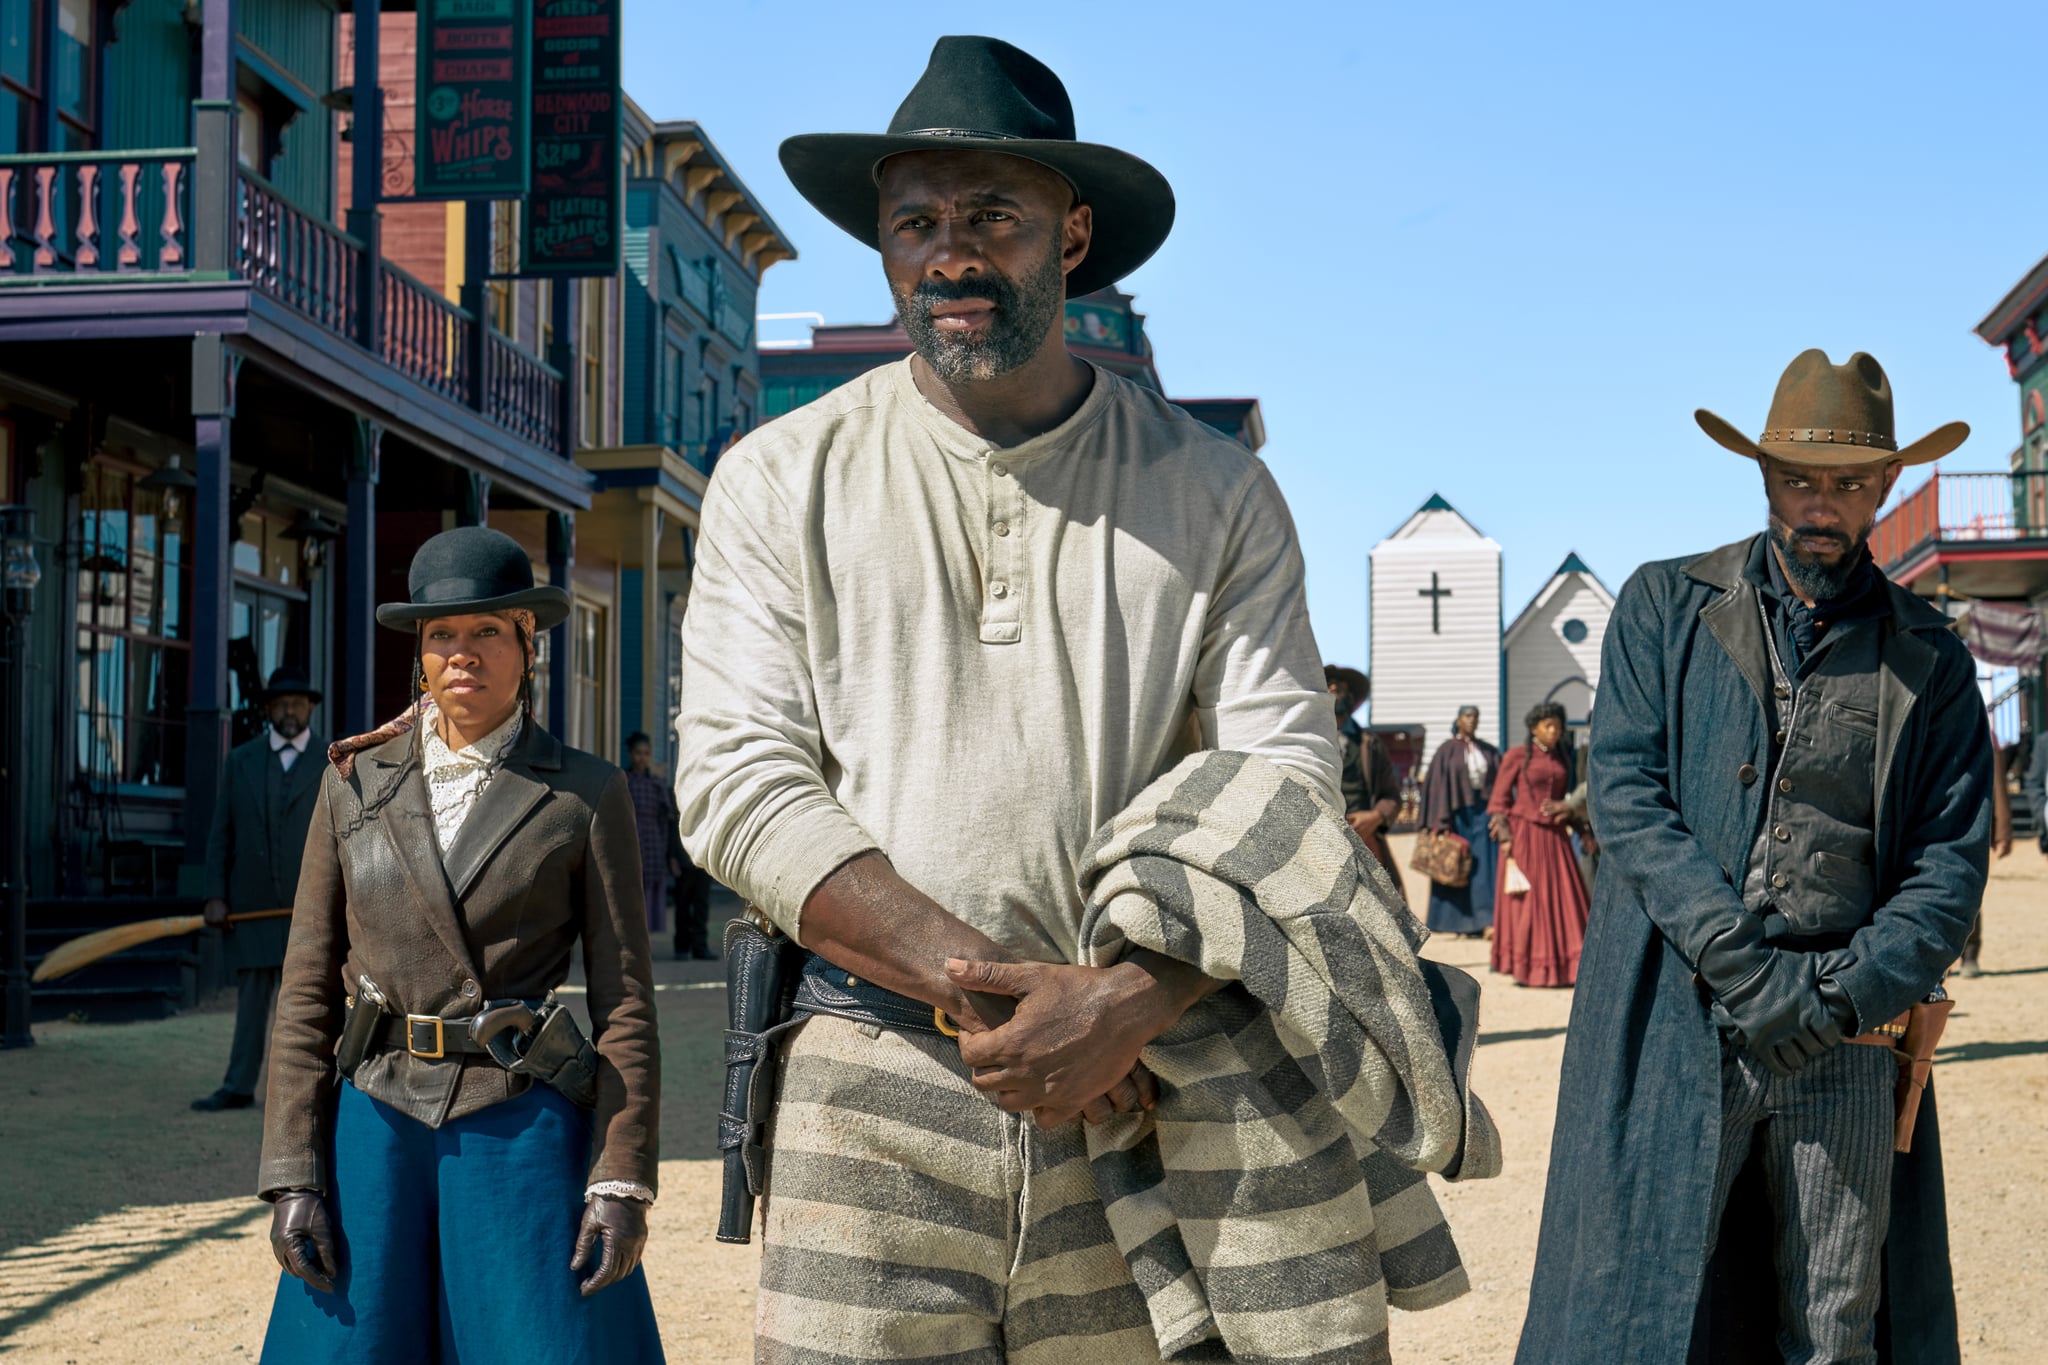 THE HARDER THEY FALL (L to R): REGINA KING as TRUDY SMITH, IDRIS ELBA as RUFUS BUCK, LAKEITH STANFIELD as CHEROKEE BILL. CR: DAVID LEE/NETFLIX†© 2021